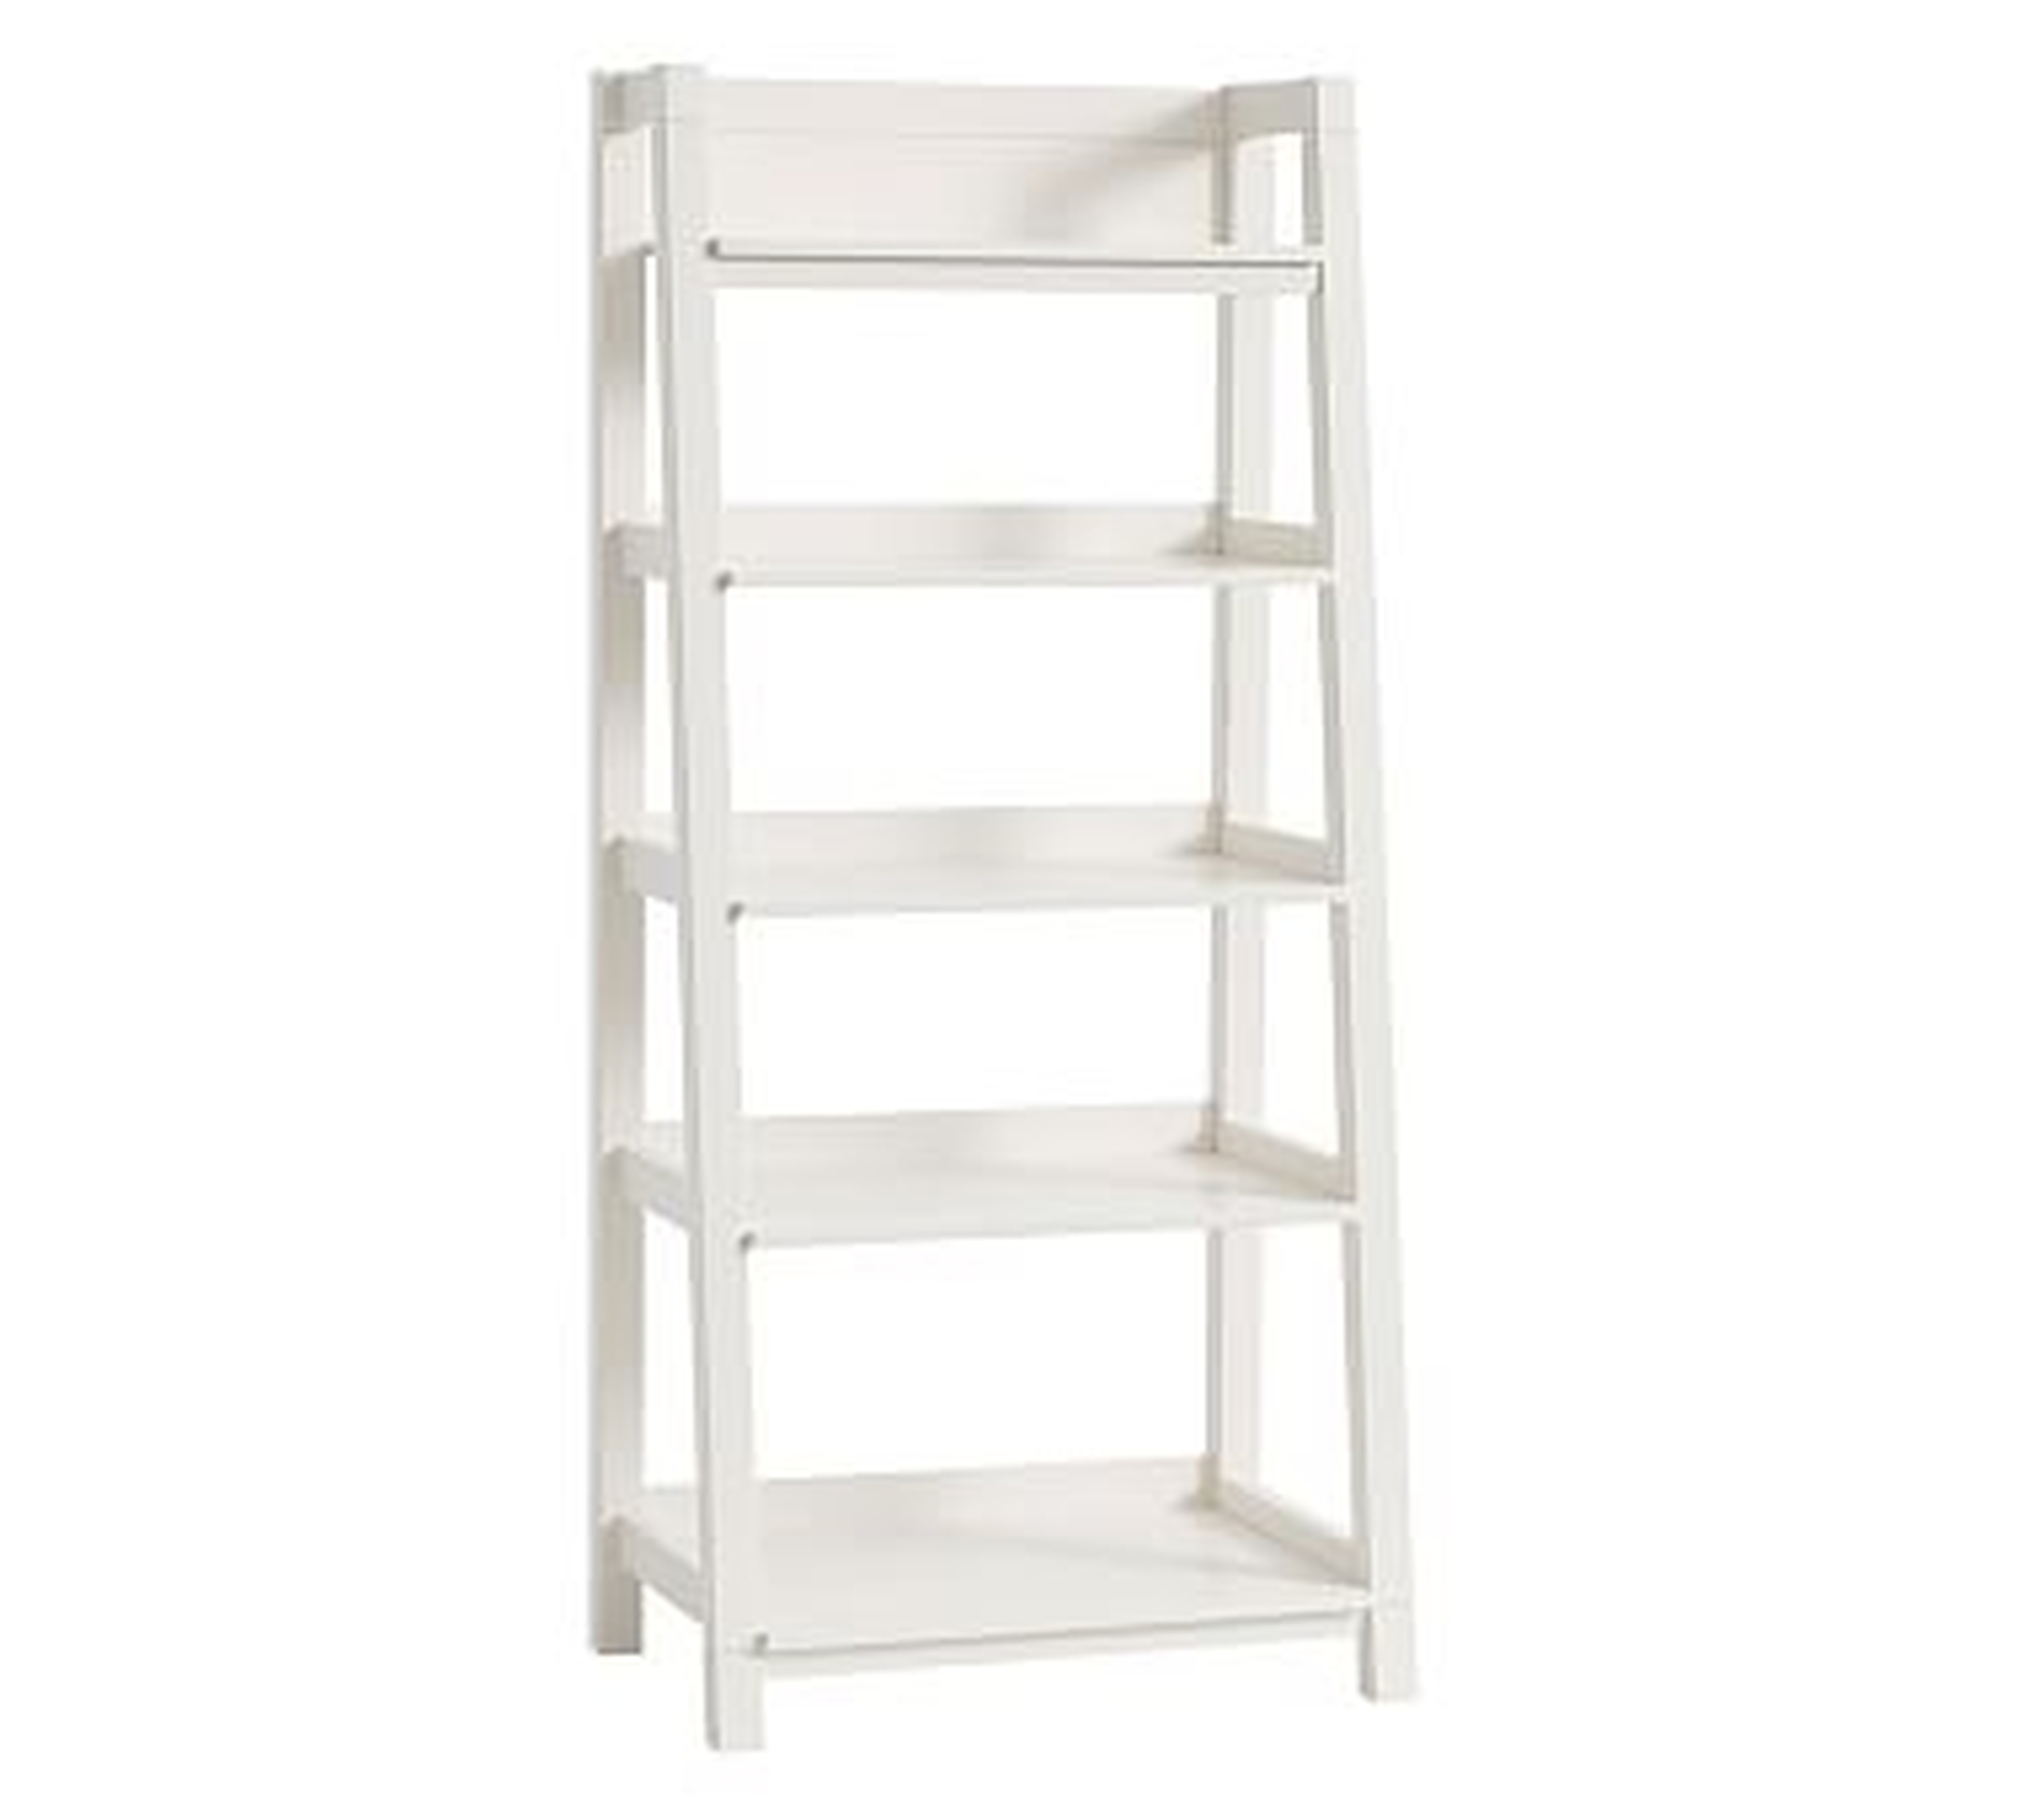 Morgan Leaning Bookcase, Simply White, Standard UPS Delivery - Pottery Barn Kids